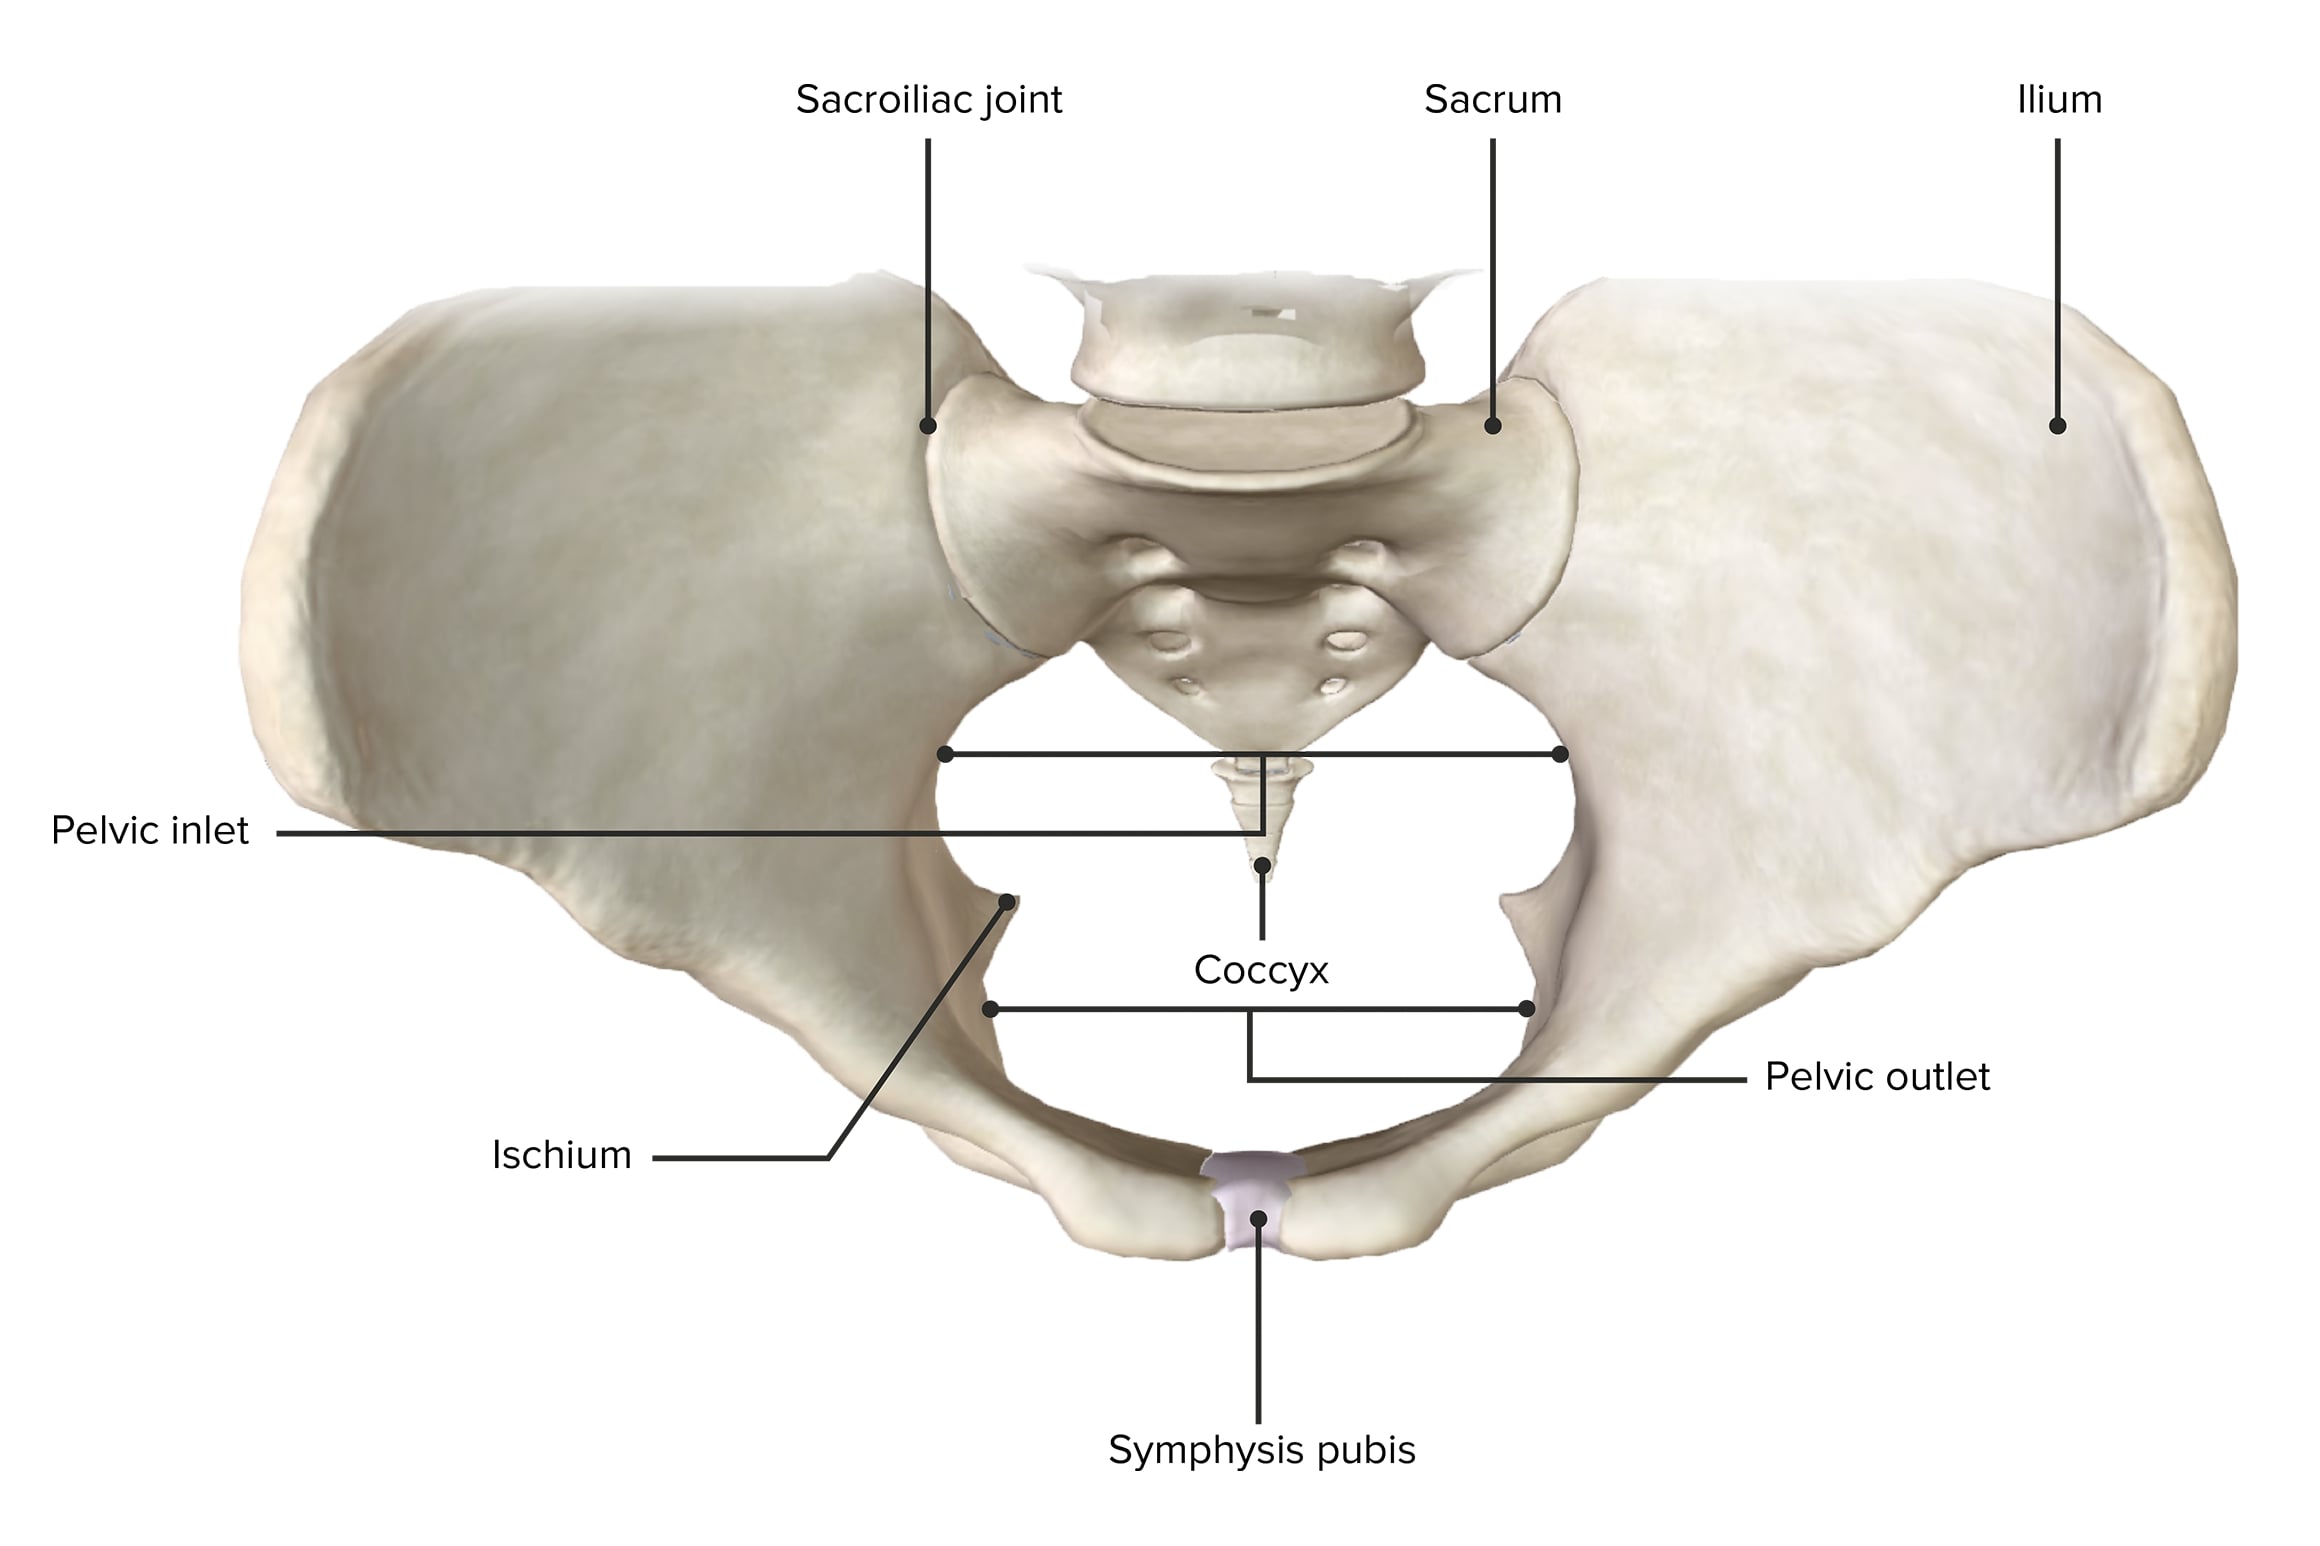 The anatomy of the pelvis a Ventral view of the pelvic region